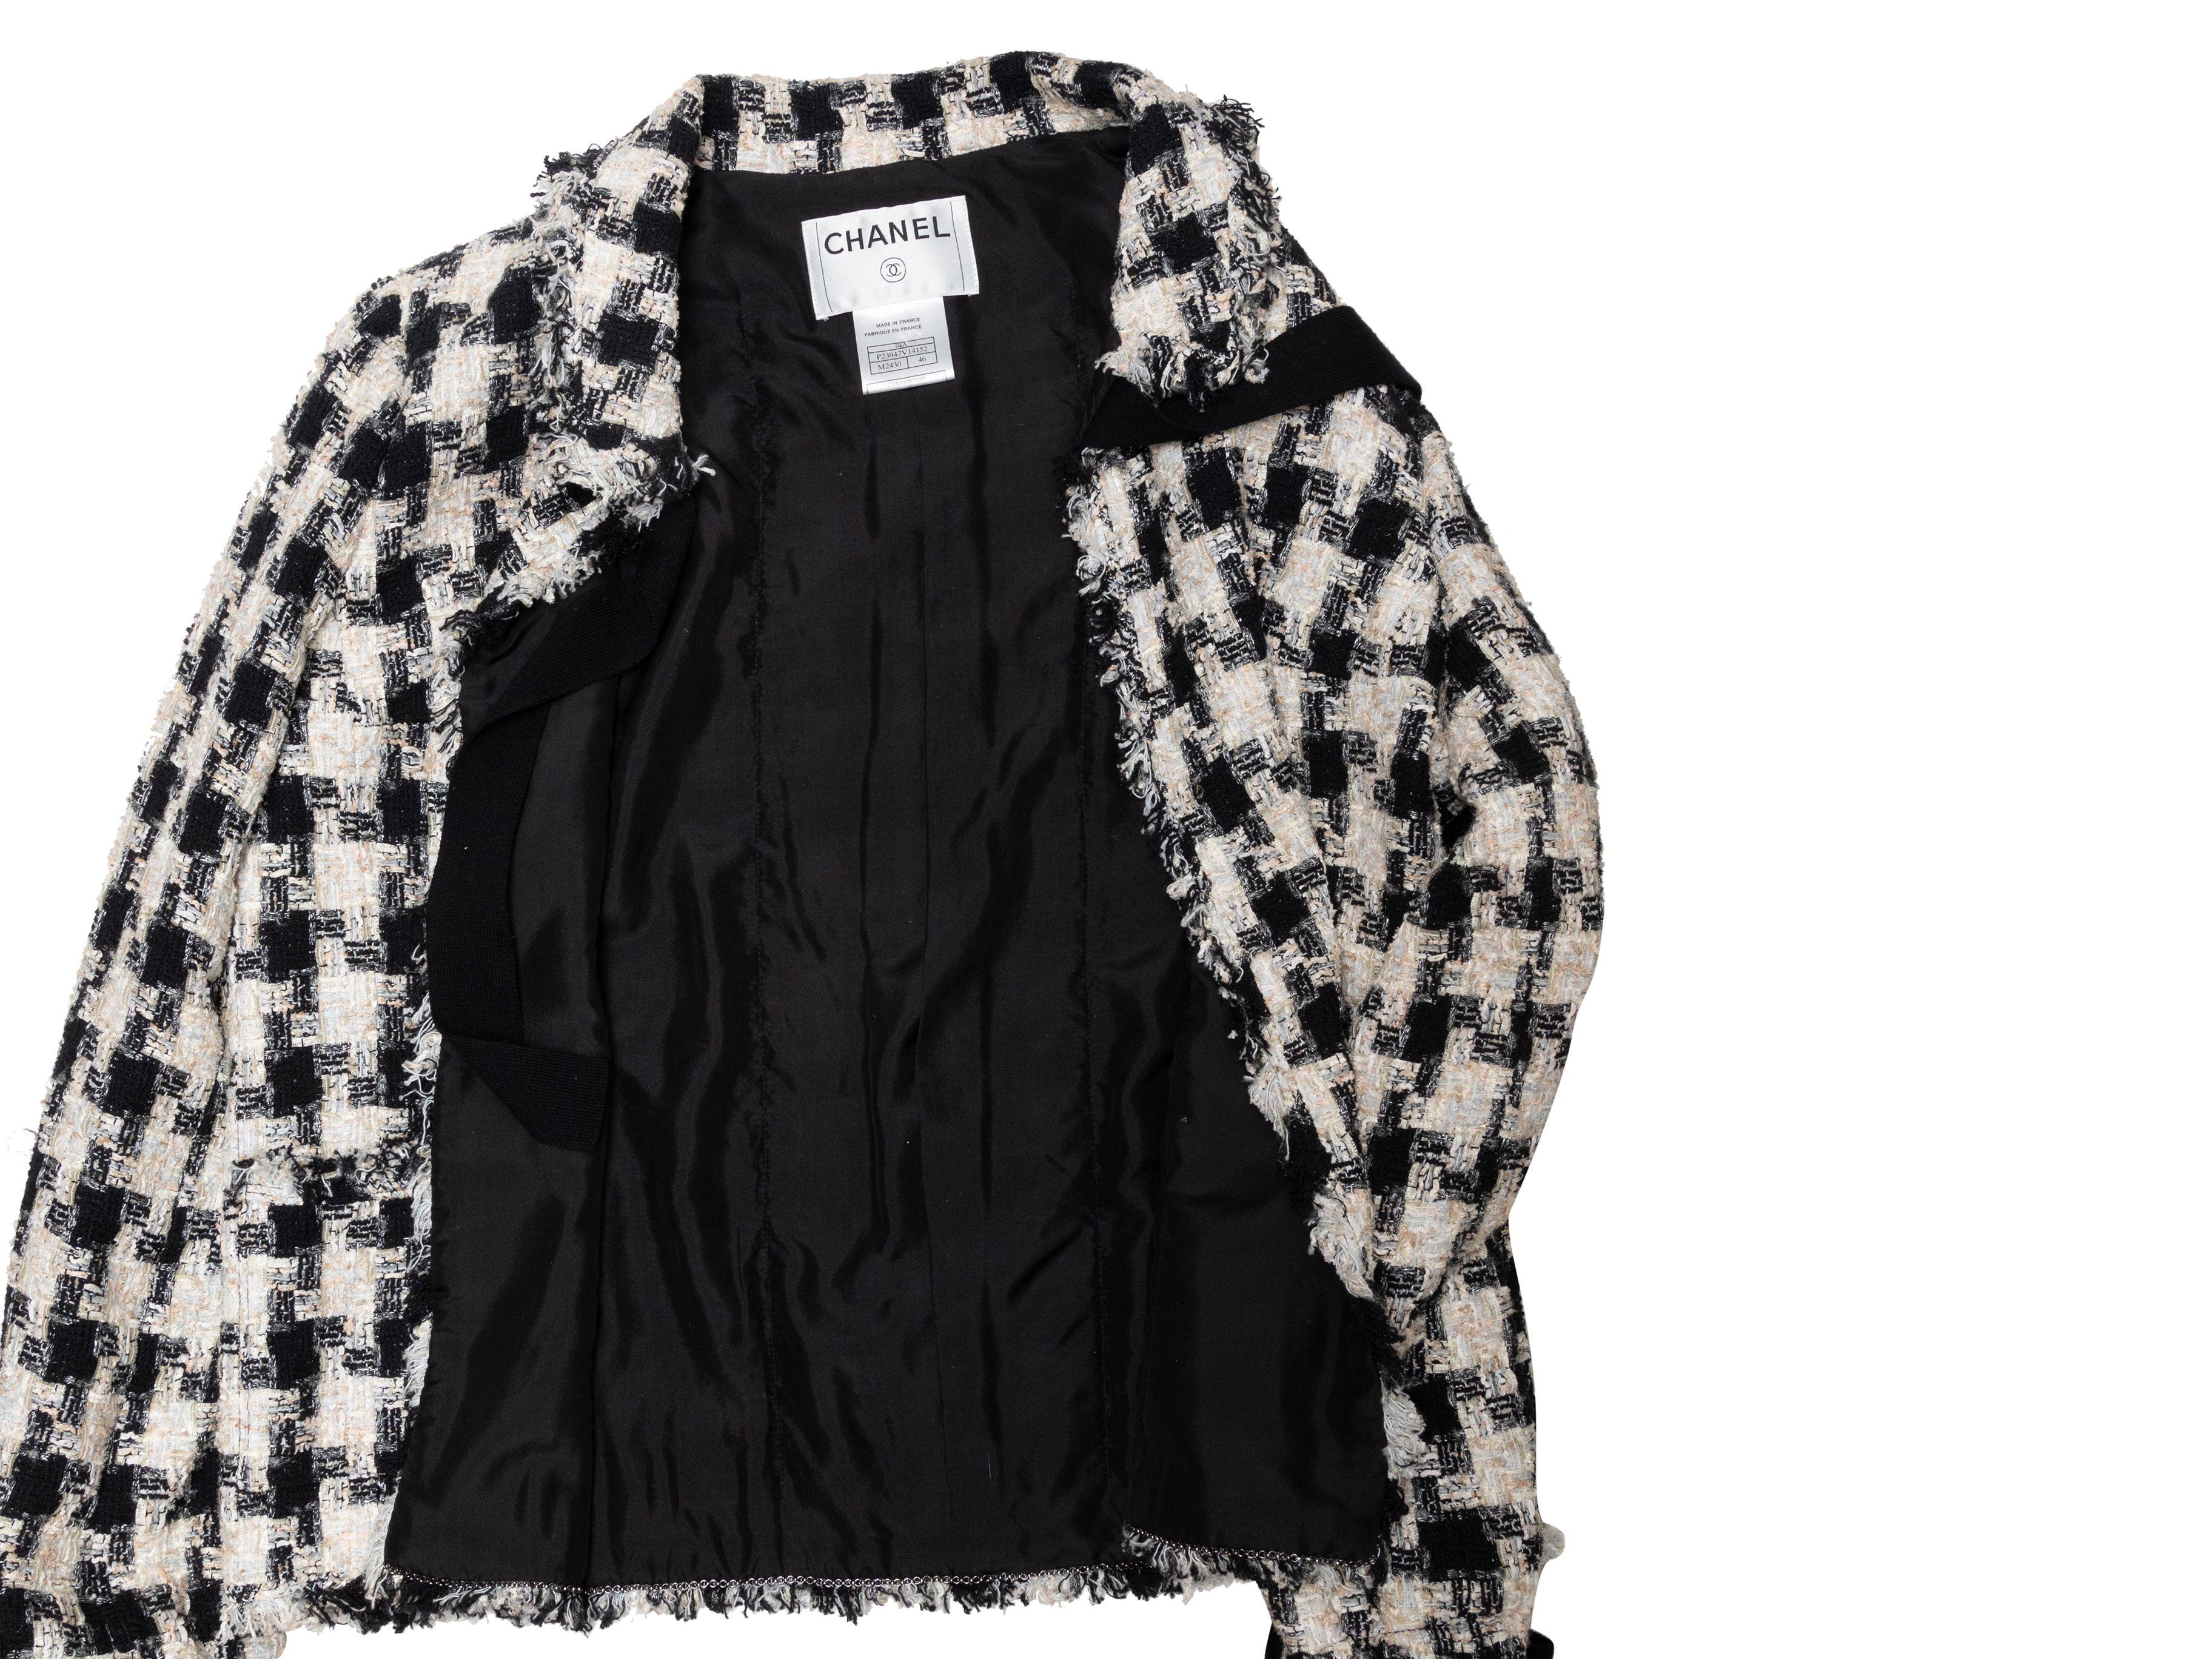 Women's Chanel Fall 2004 Black & White Houndstooth Tweed Jacket